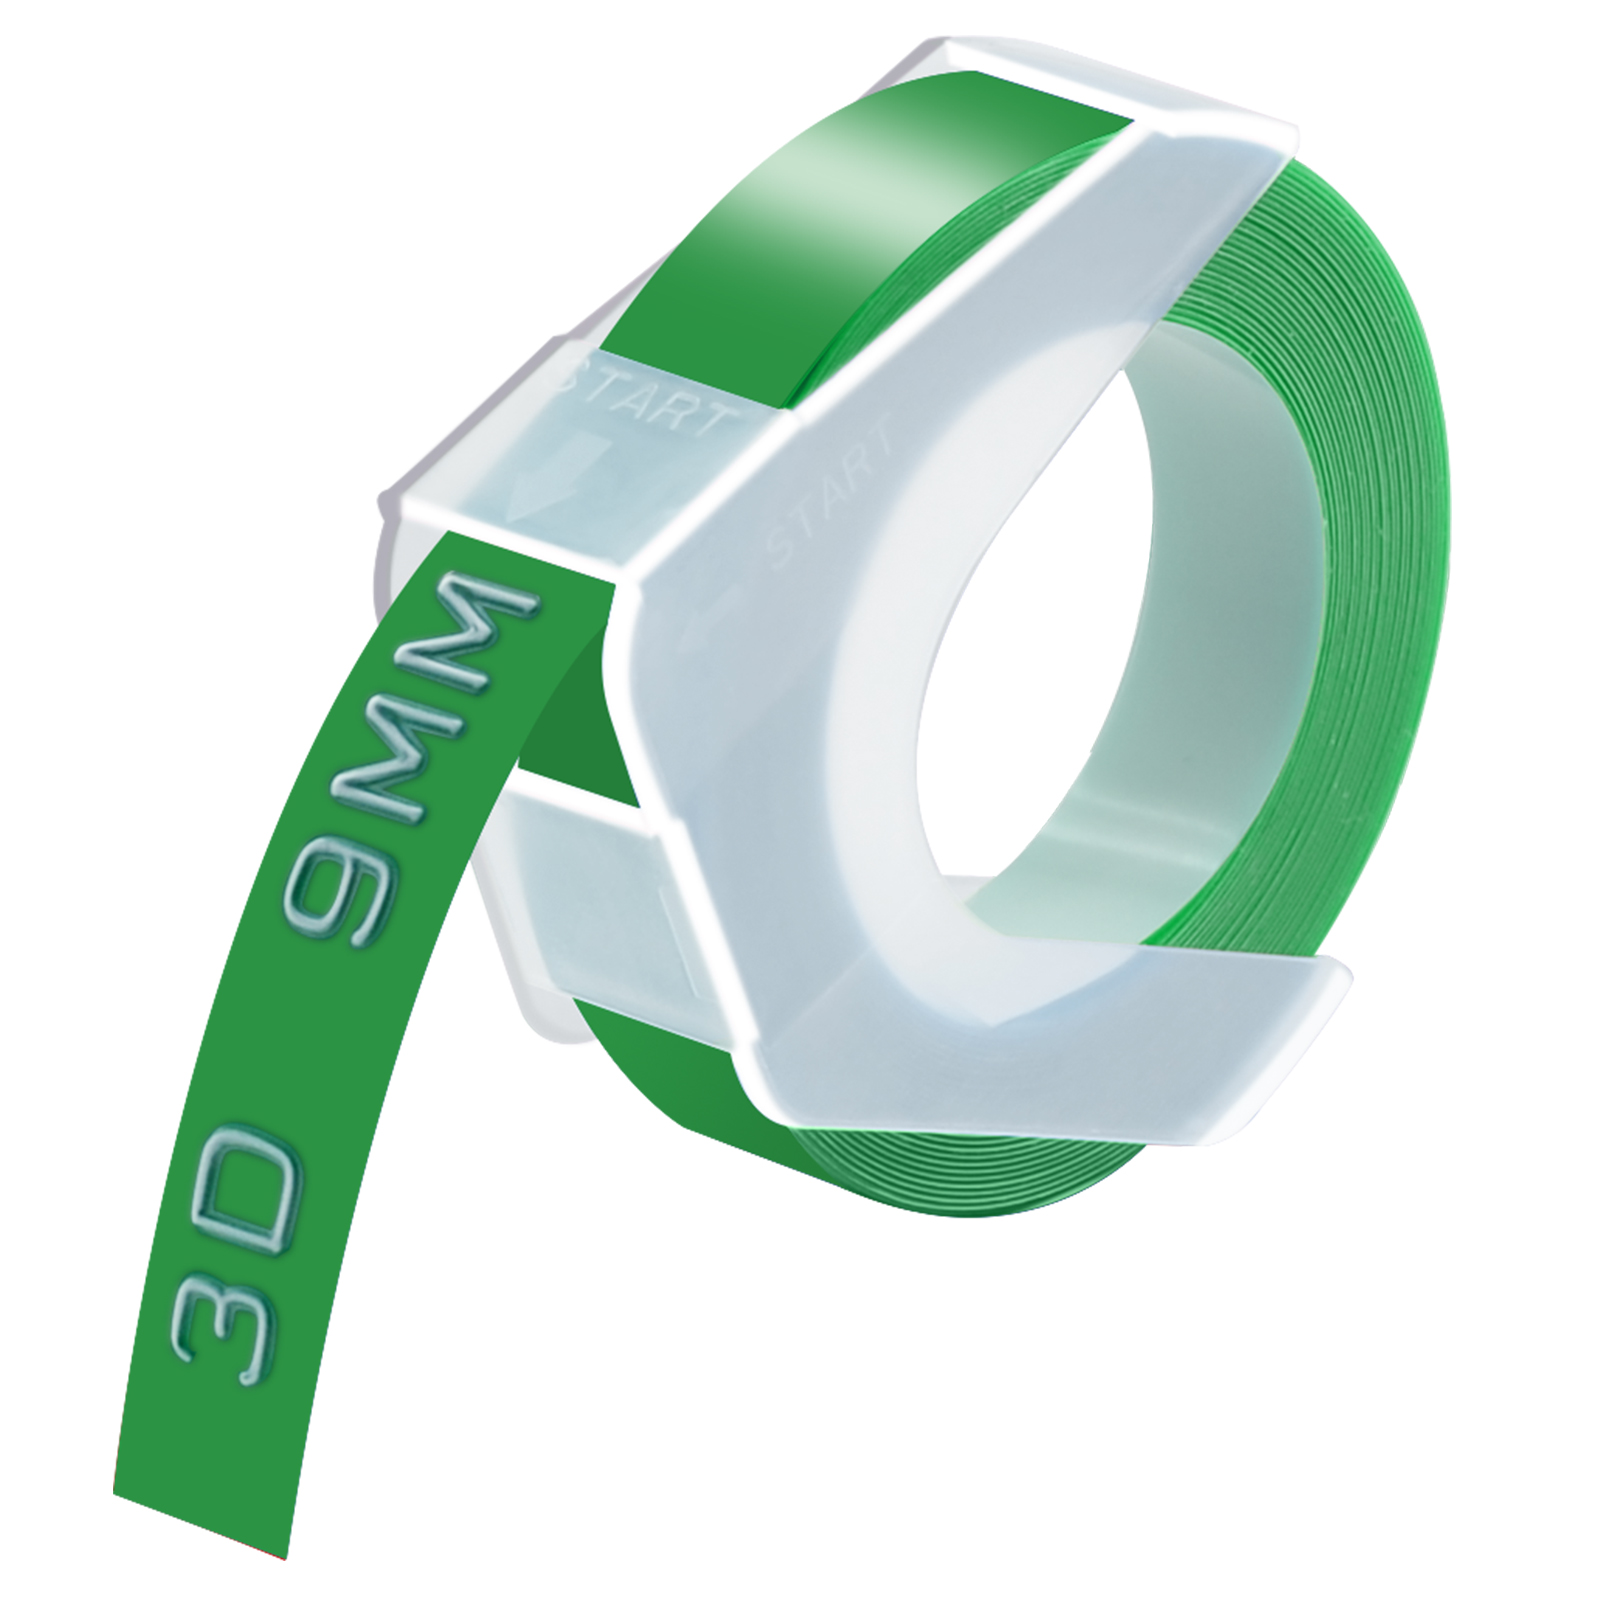 GREENCYCLE 40 Pack Compatible for Dymo 3D Emobssing Label Maker Tape 520103 White on Green 9mm 3/8''x 9.8ft 3D Plastic Labels